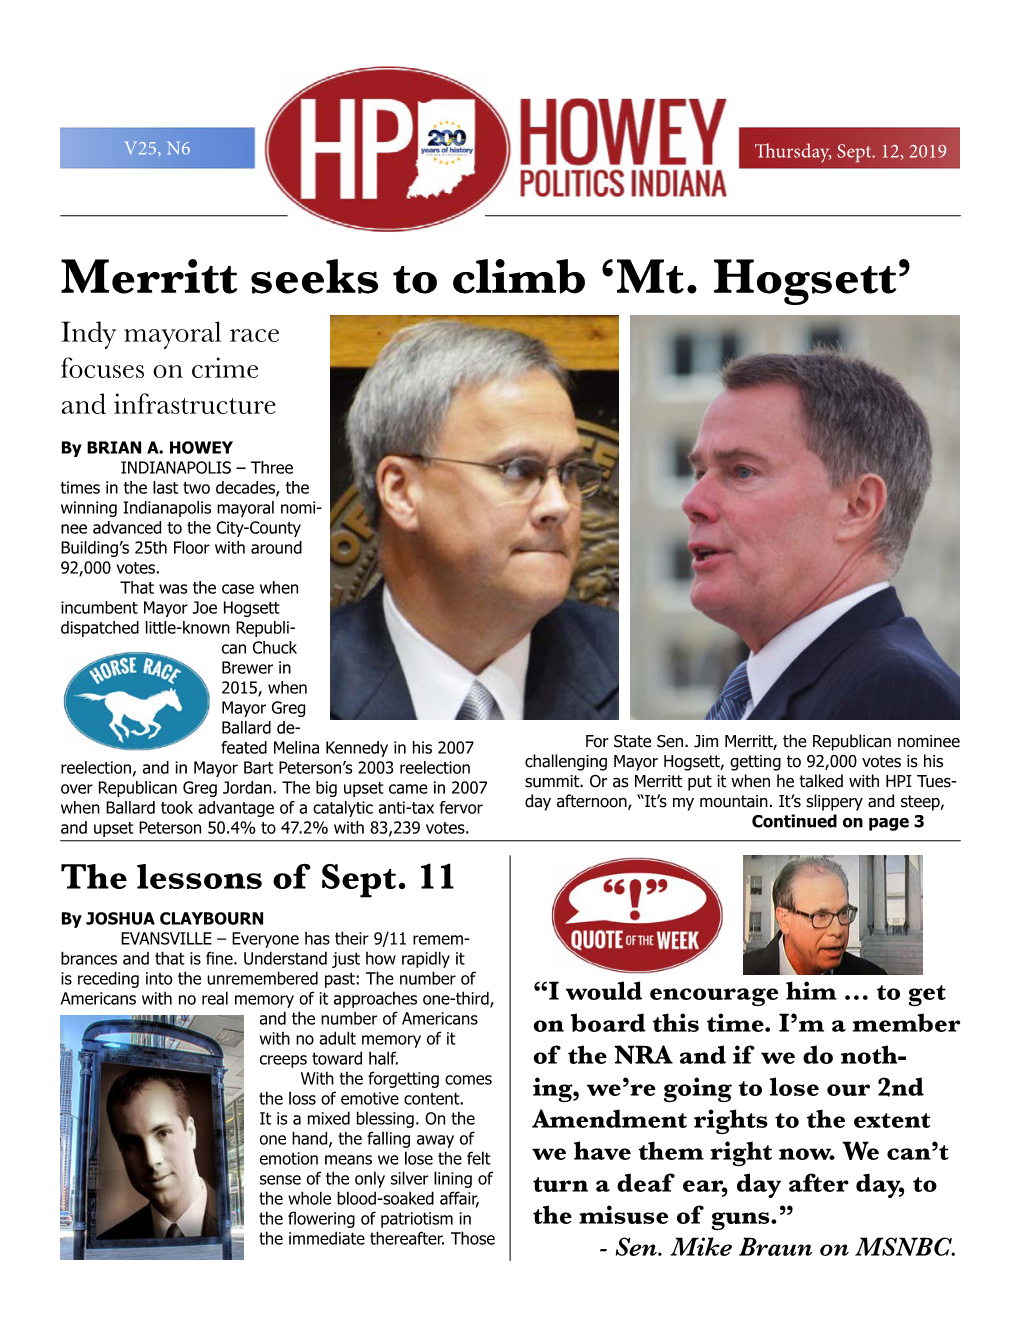 Mt. Hogsett’ Indy Mayoral Race Focuses on Crime and Infrastructure by BRIAN A